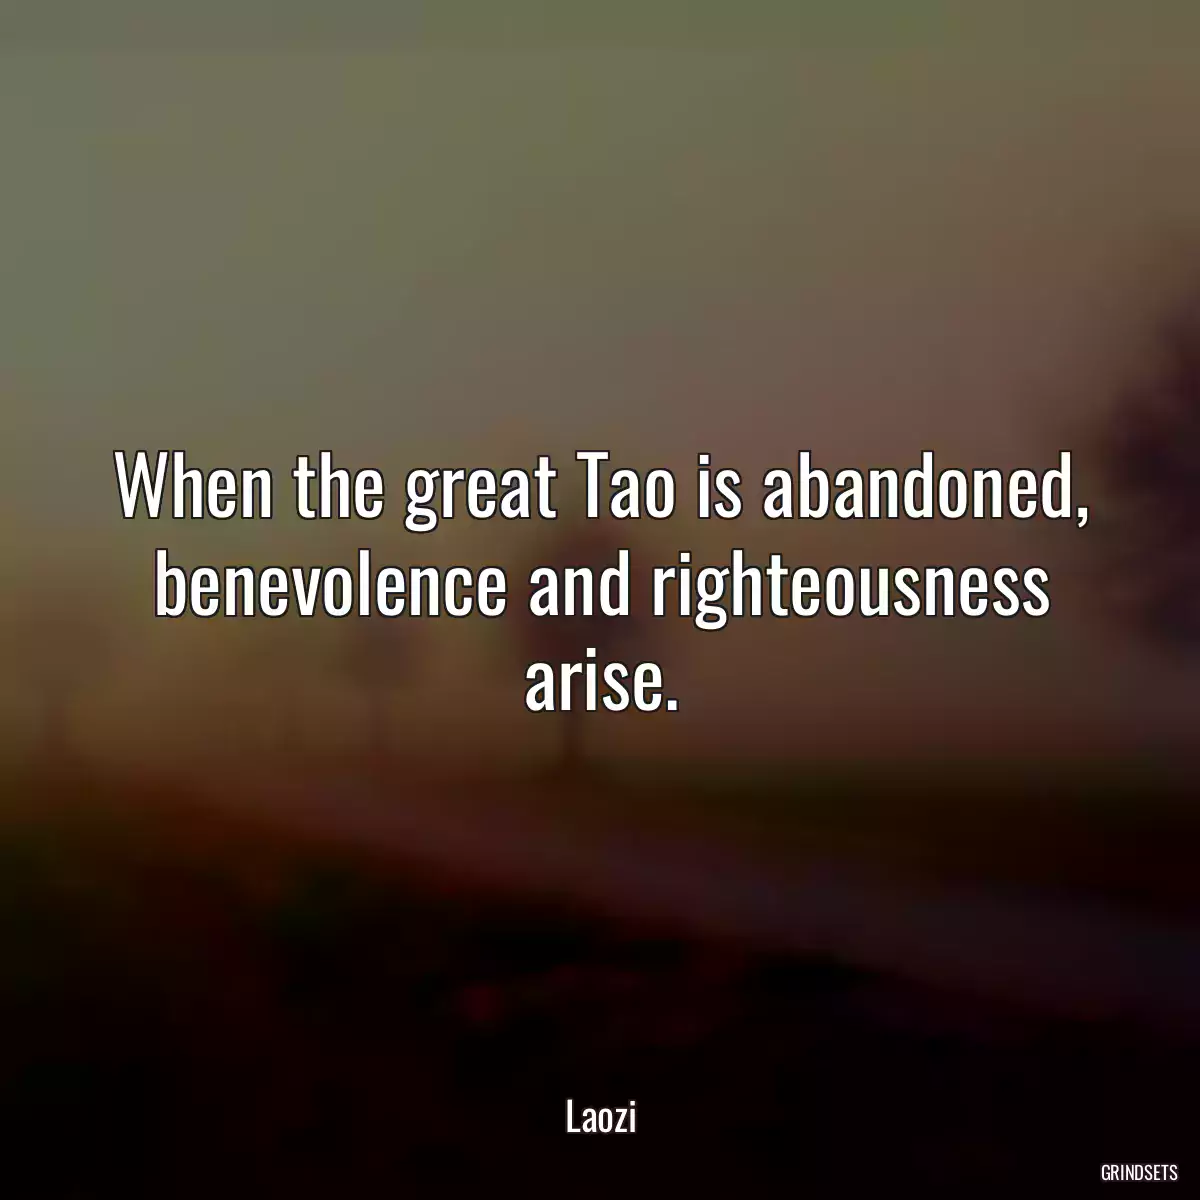 When the great Tao is abandoned, benevolence and righteousness arise.